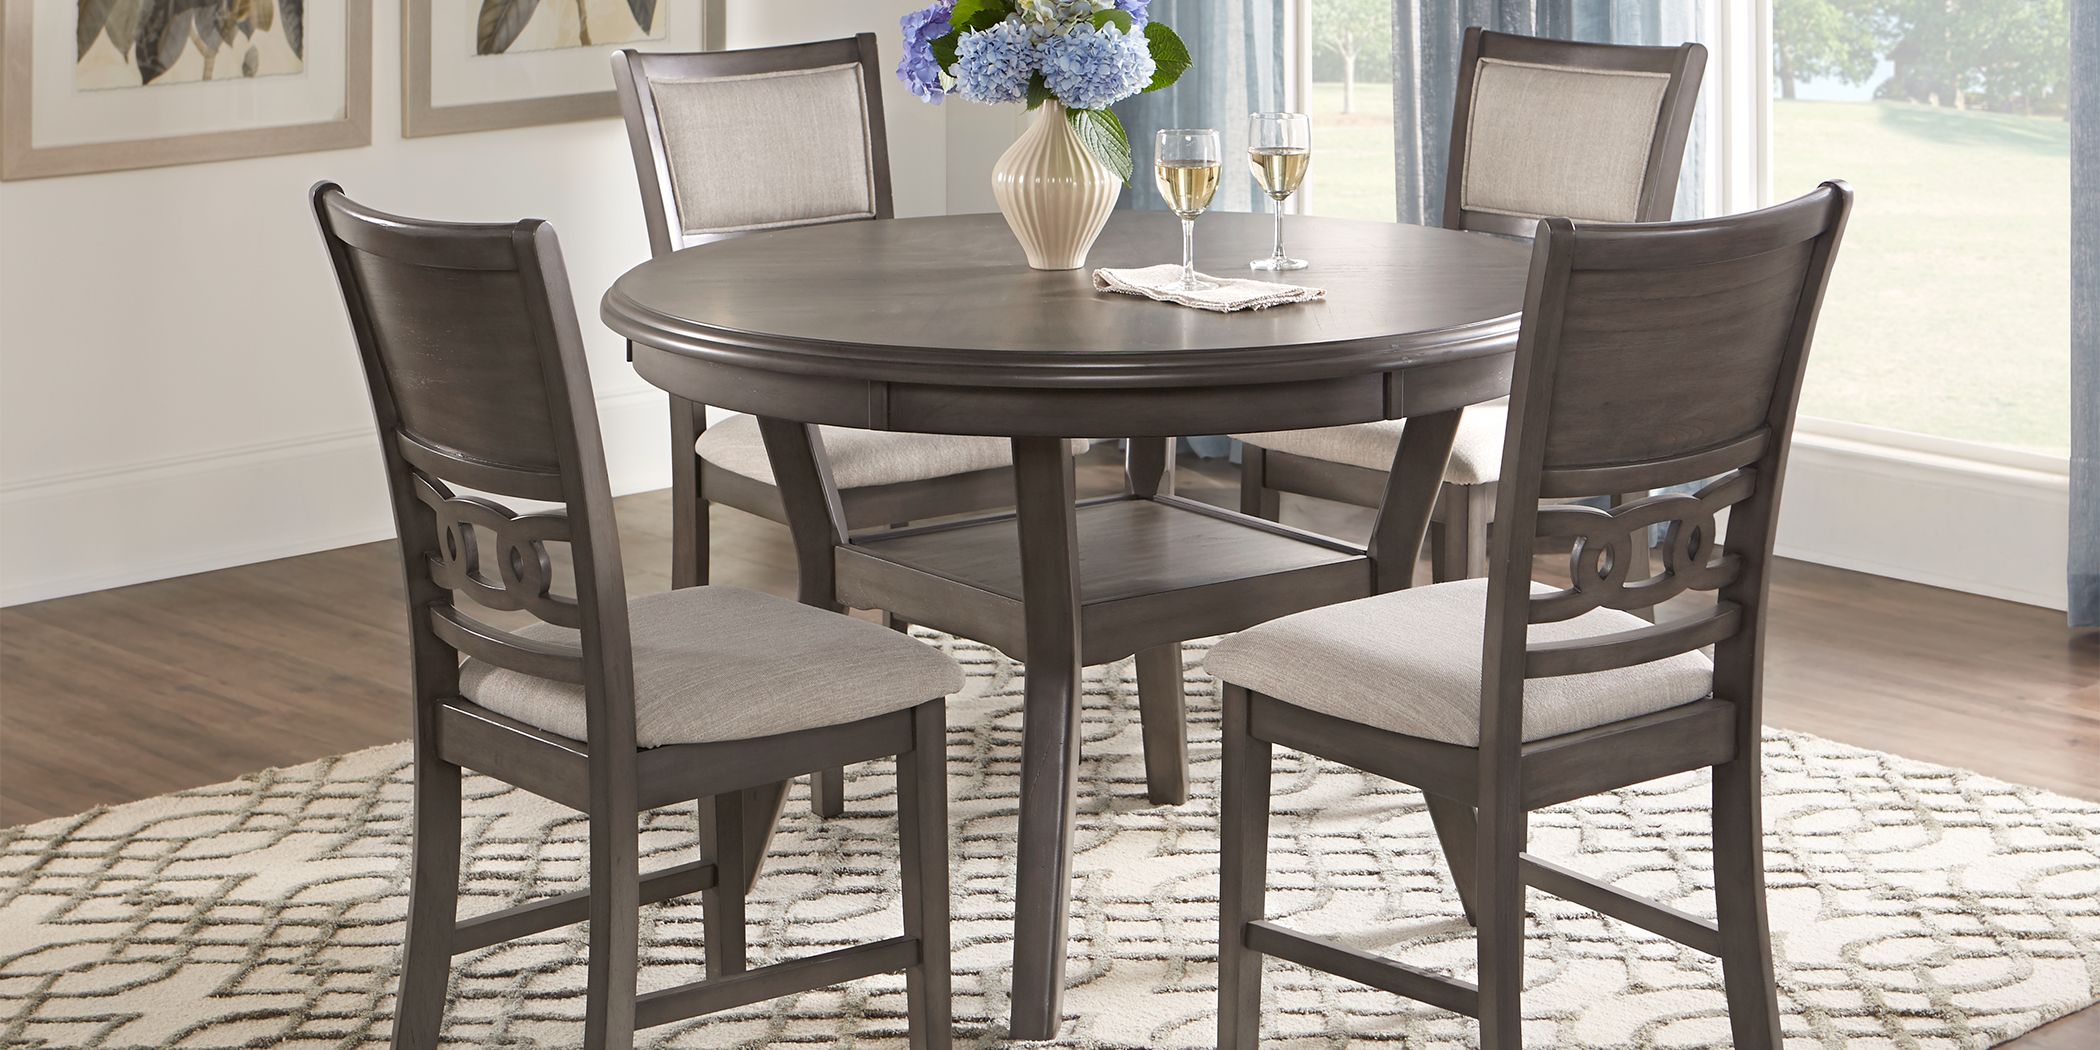 Rooms To Go Dining Room Furniture, Rooms To Go Furniture Dining Room Sets